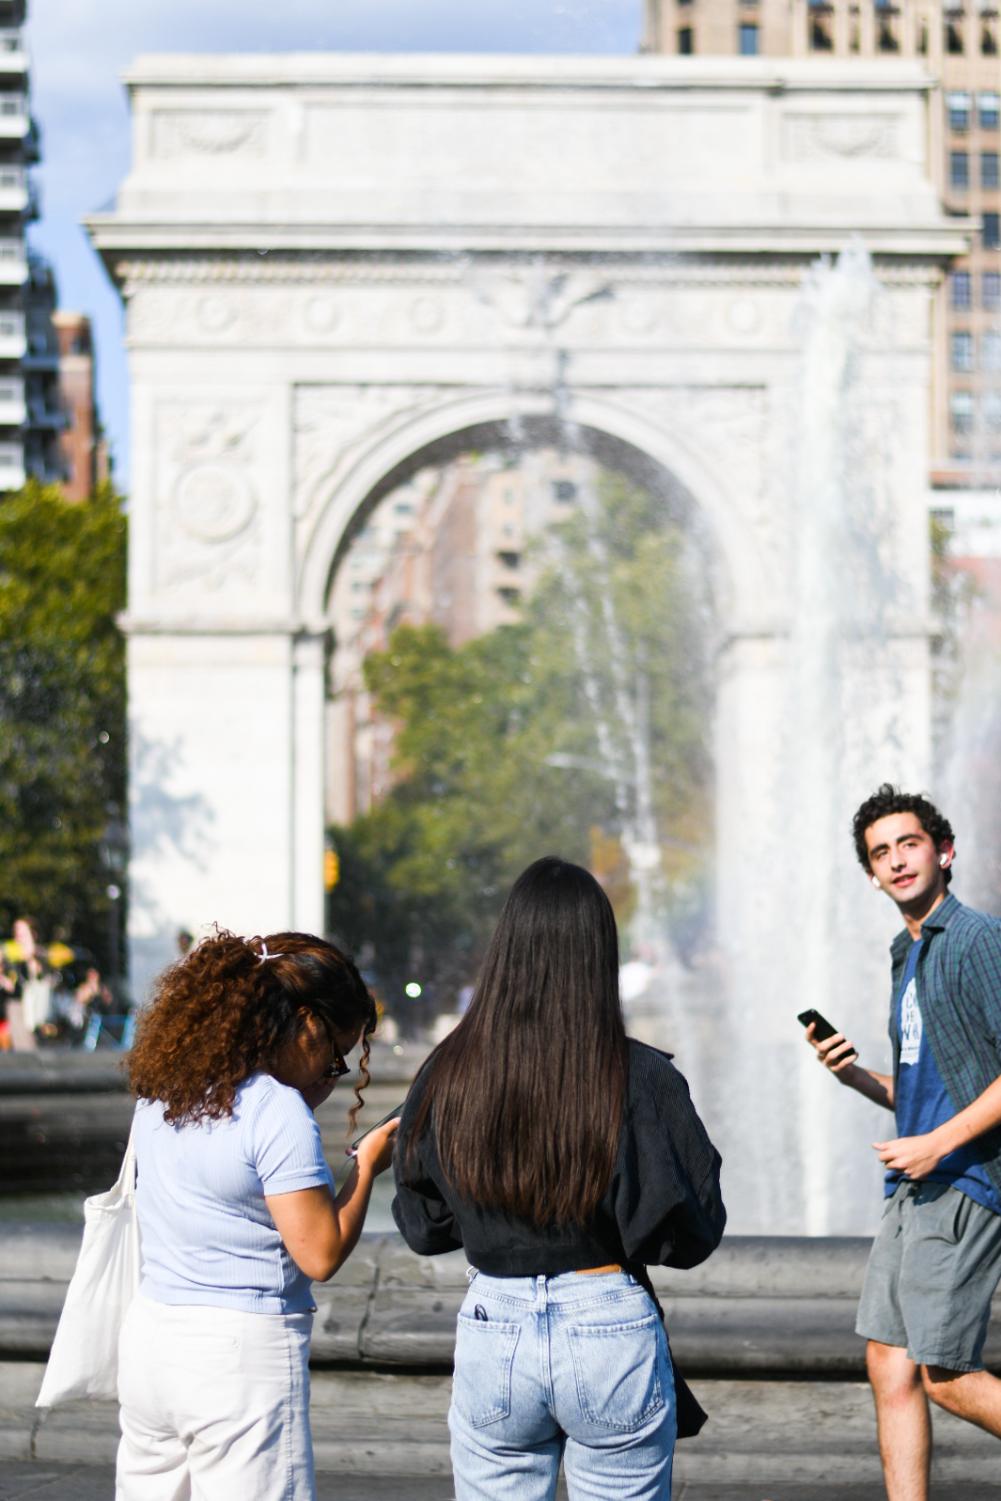 The back of a girl wearing a black shirt and jeans, standing next to another girl wearing a blue shirt and white jeans. Behind them is the marble arch of Washington Square Park, and the park fountain.